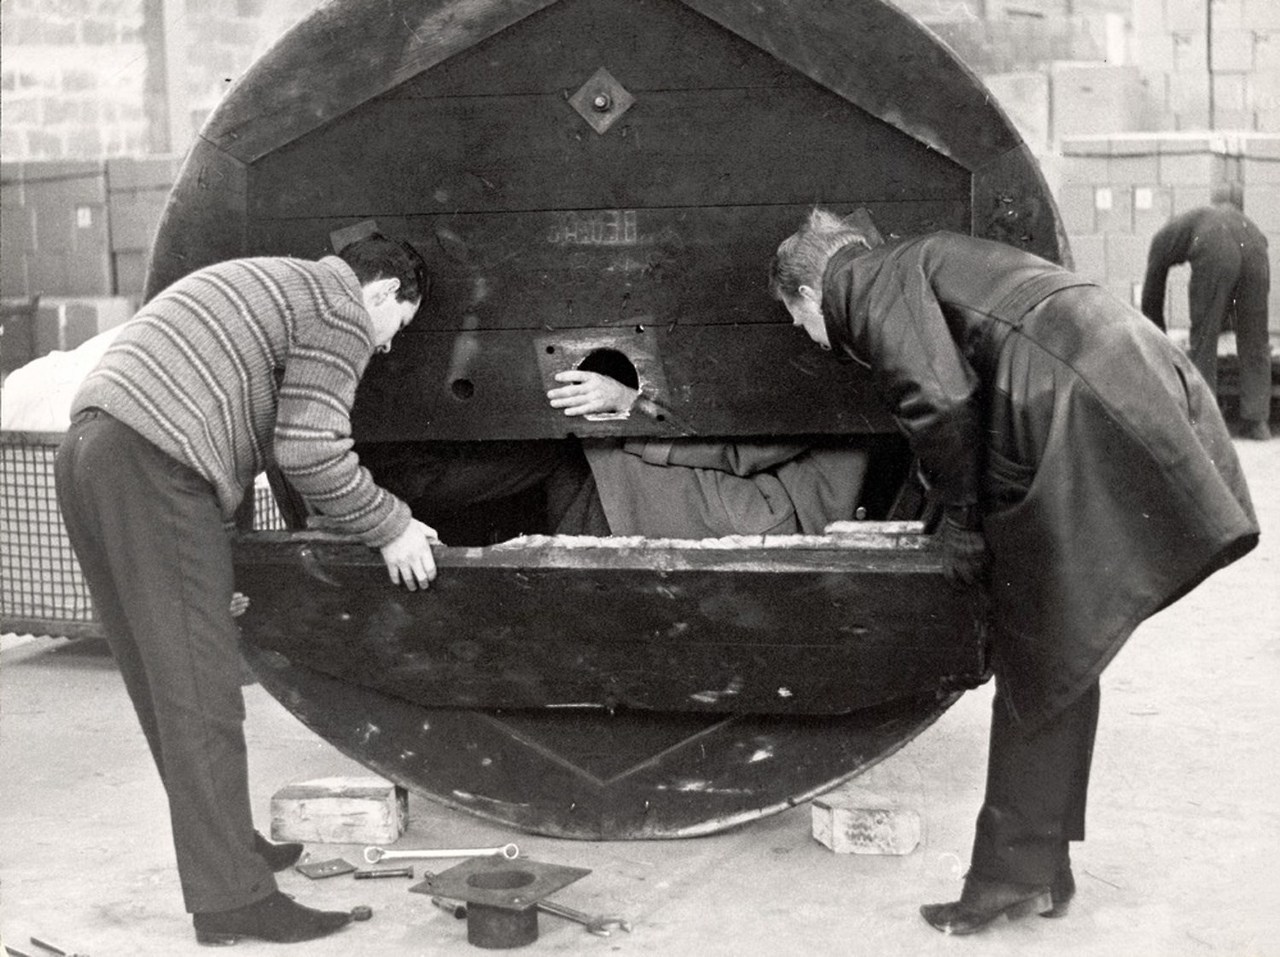  Two men open a hollow metal drum used by three West German men to bring their girlfriends